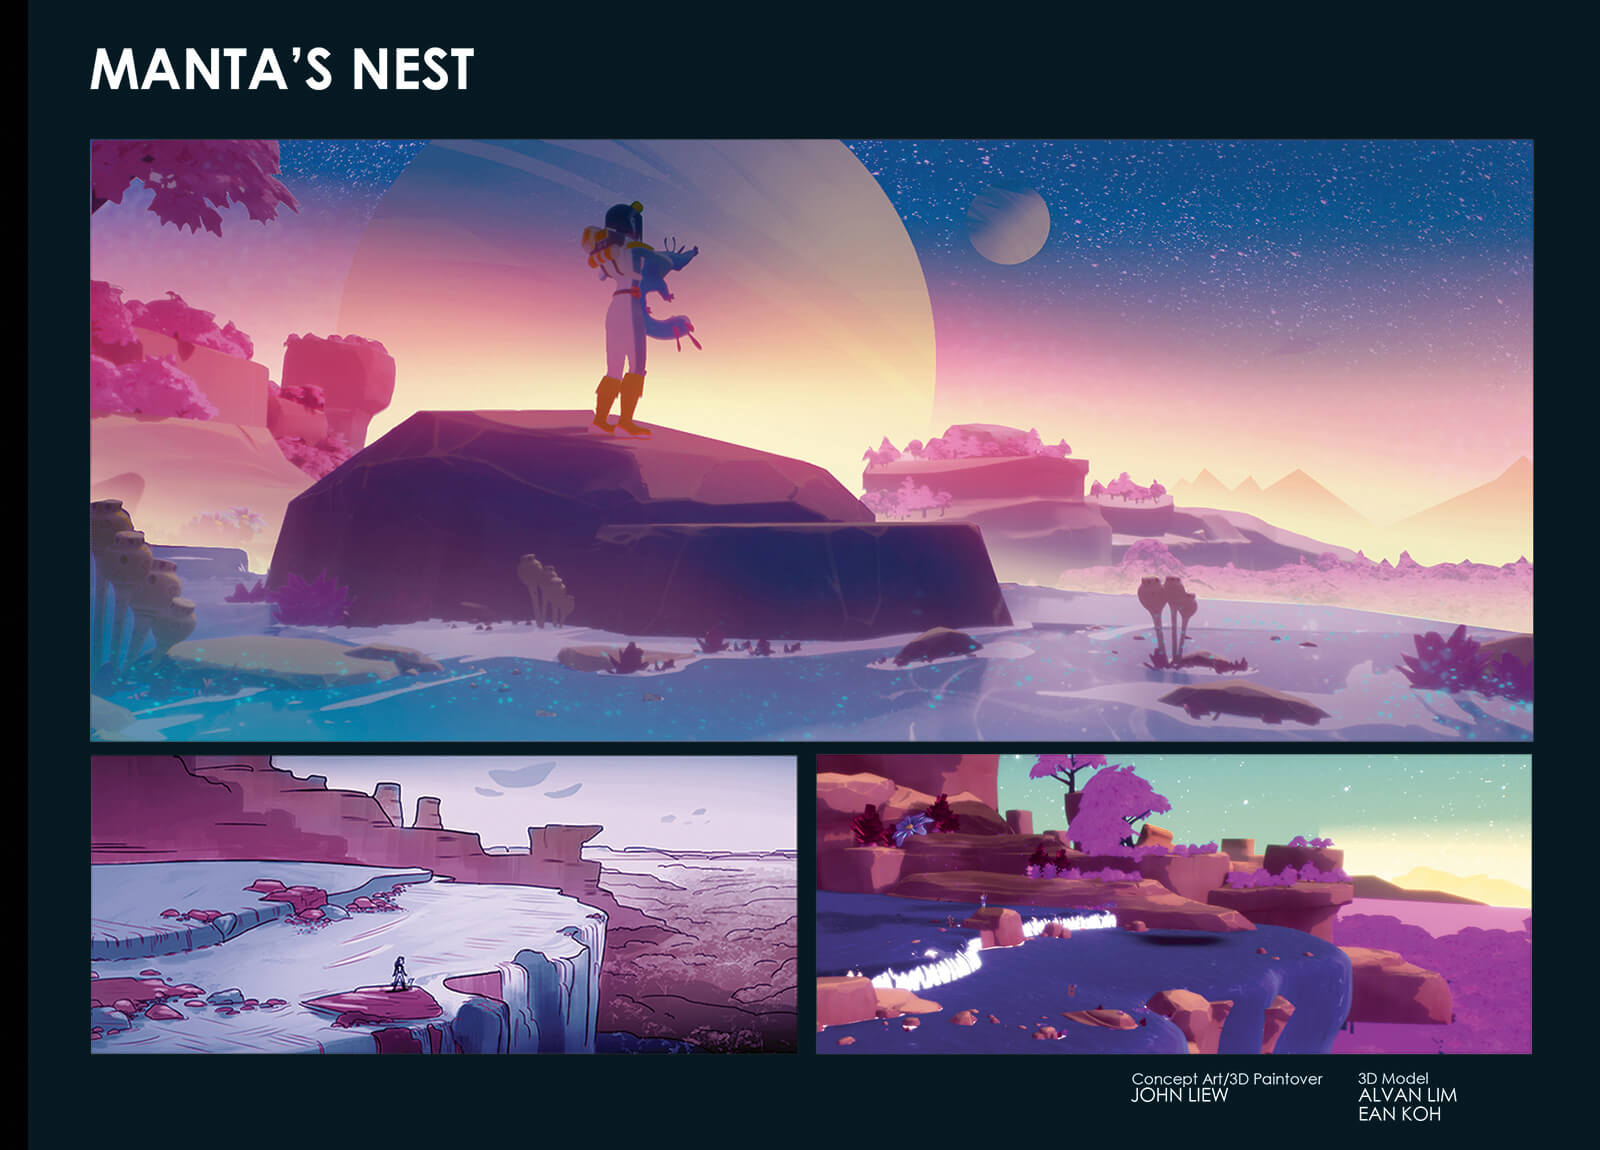 Images of the manta’s nest; concept art and 3D paintover by John Liew and 3D model by Alvan Lim and Ean Koh.